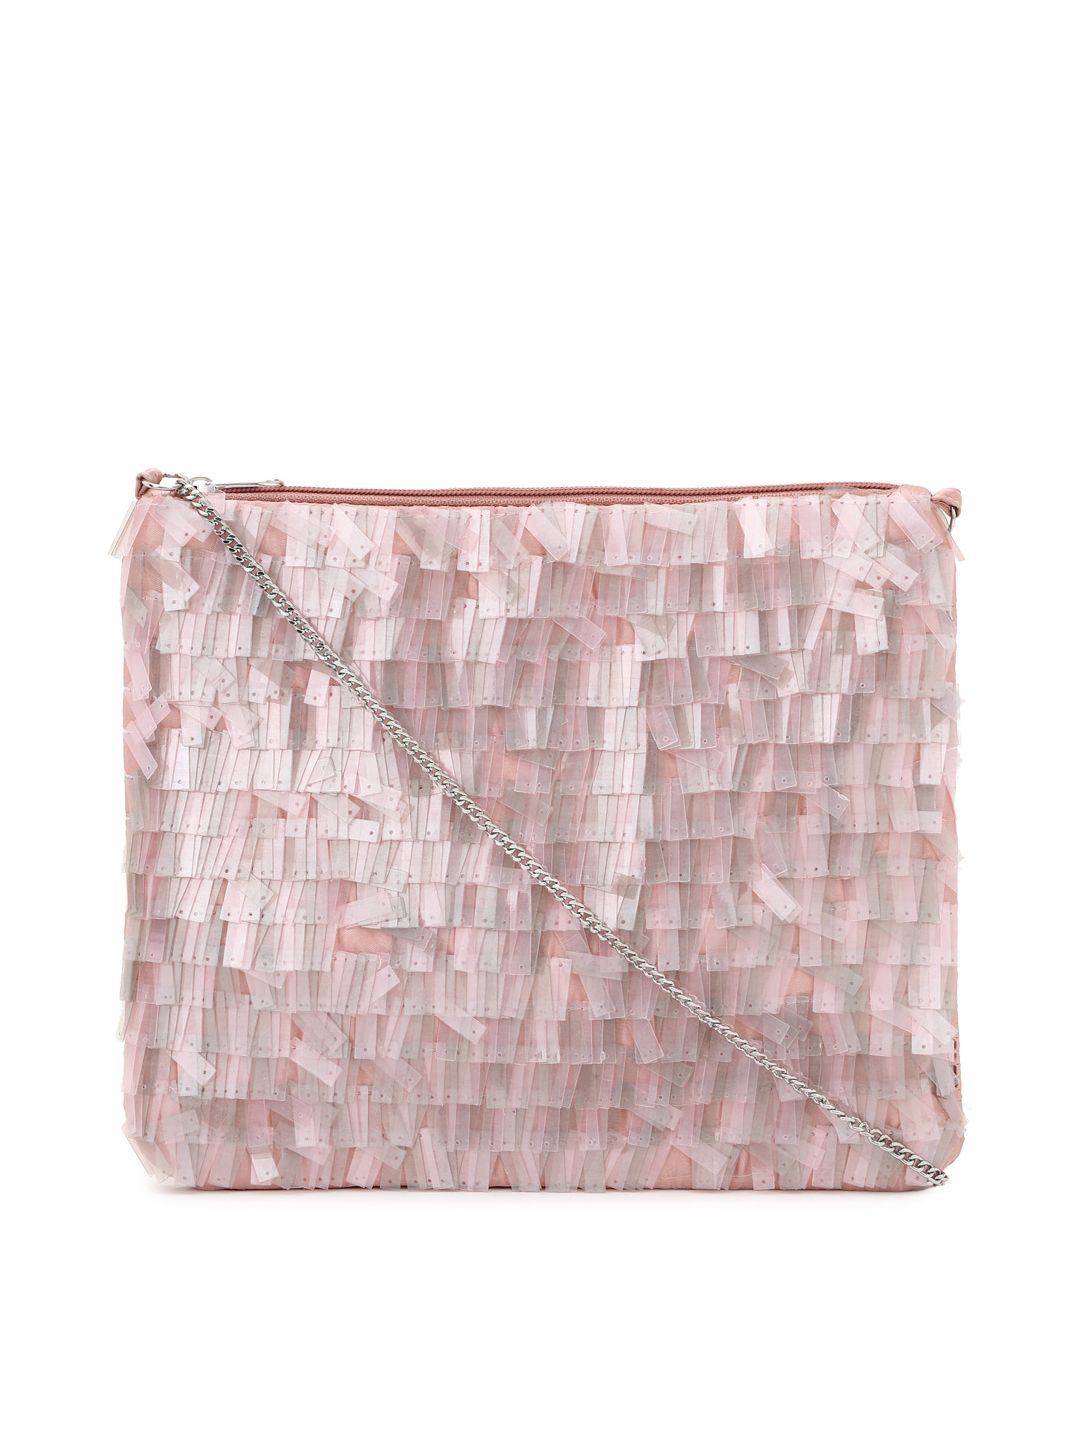 FOREVER 21 Pink Textured Structured Sling Bag with Tasselled Price in India